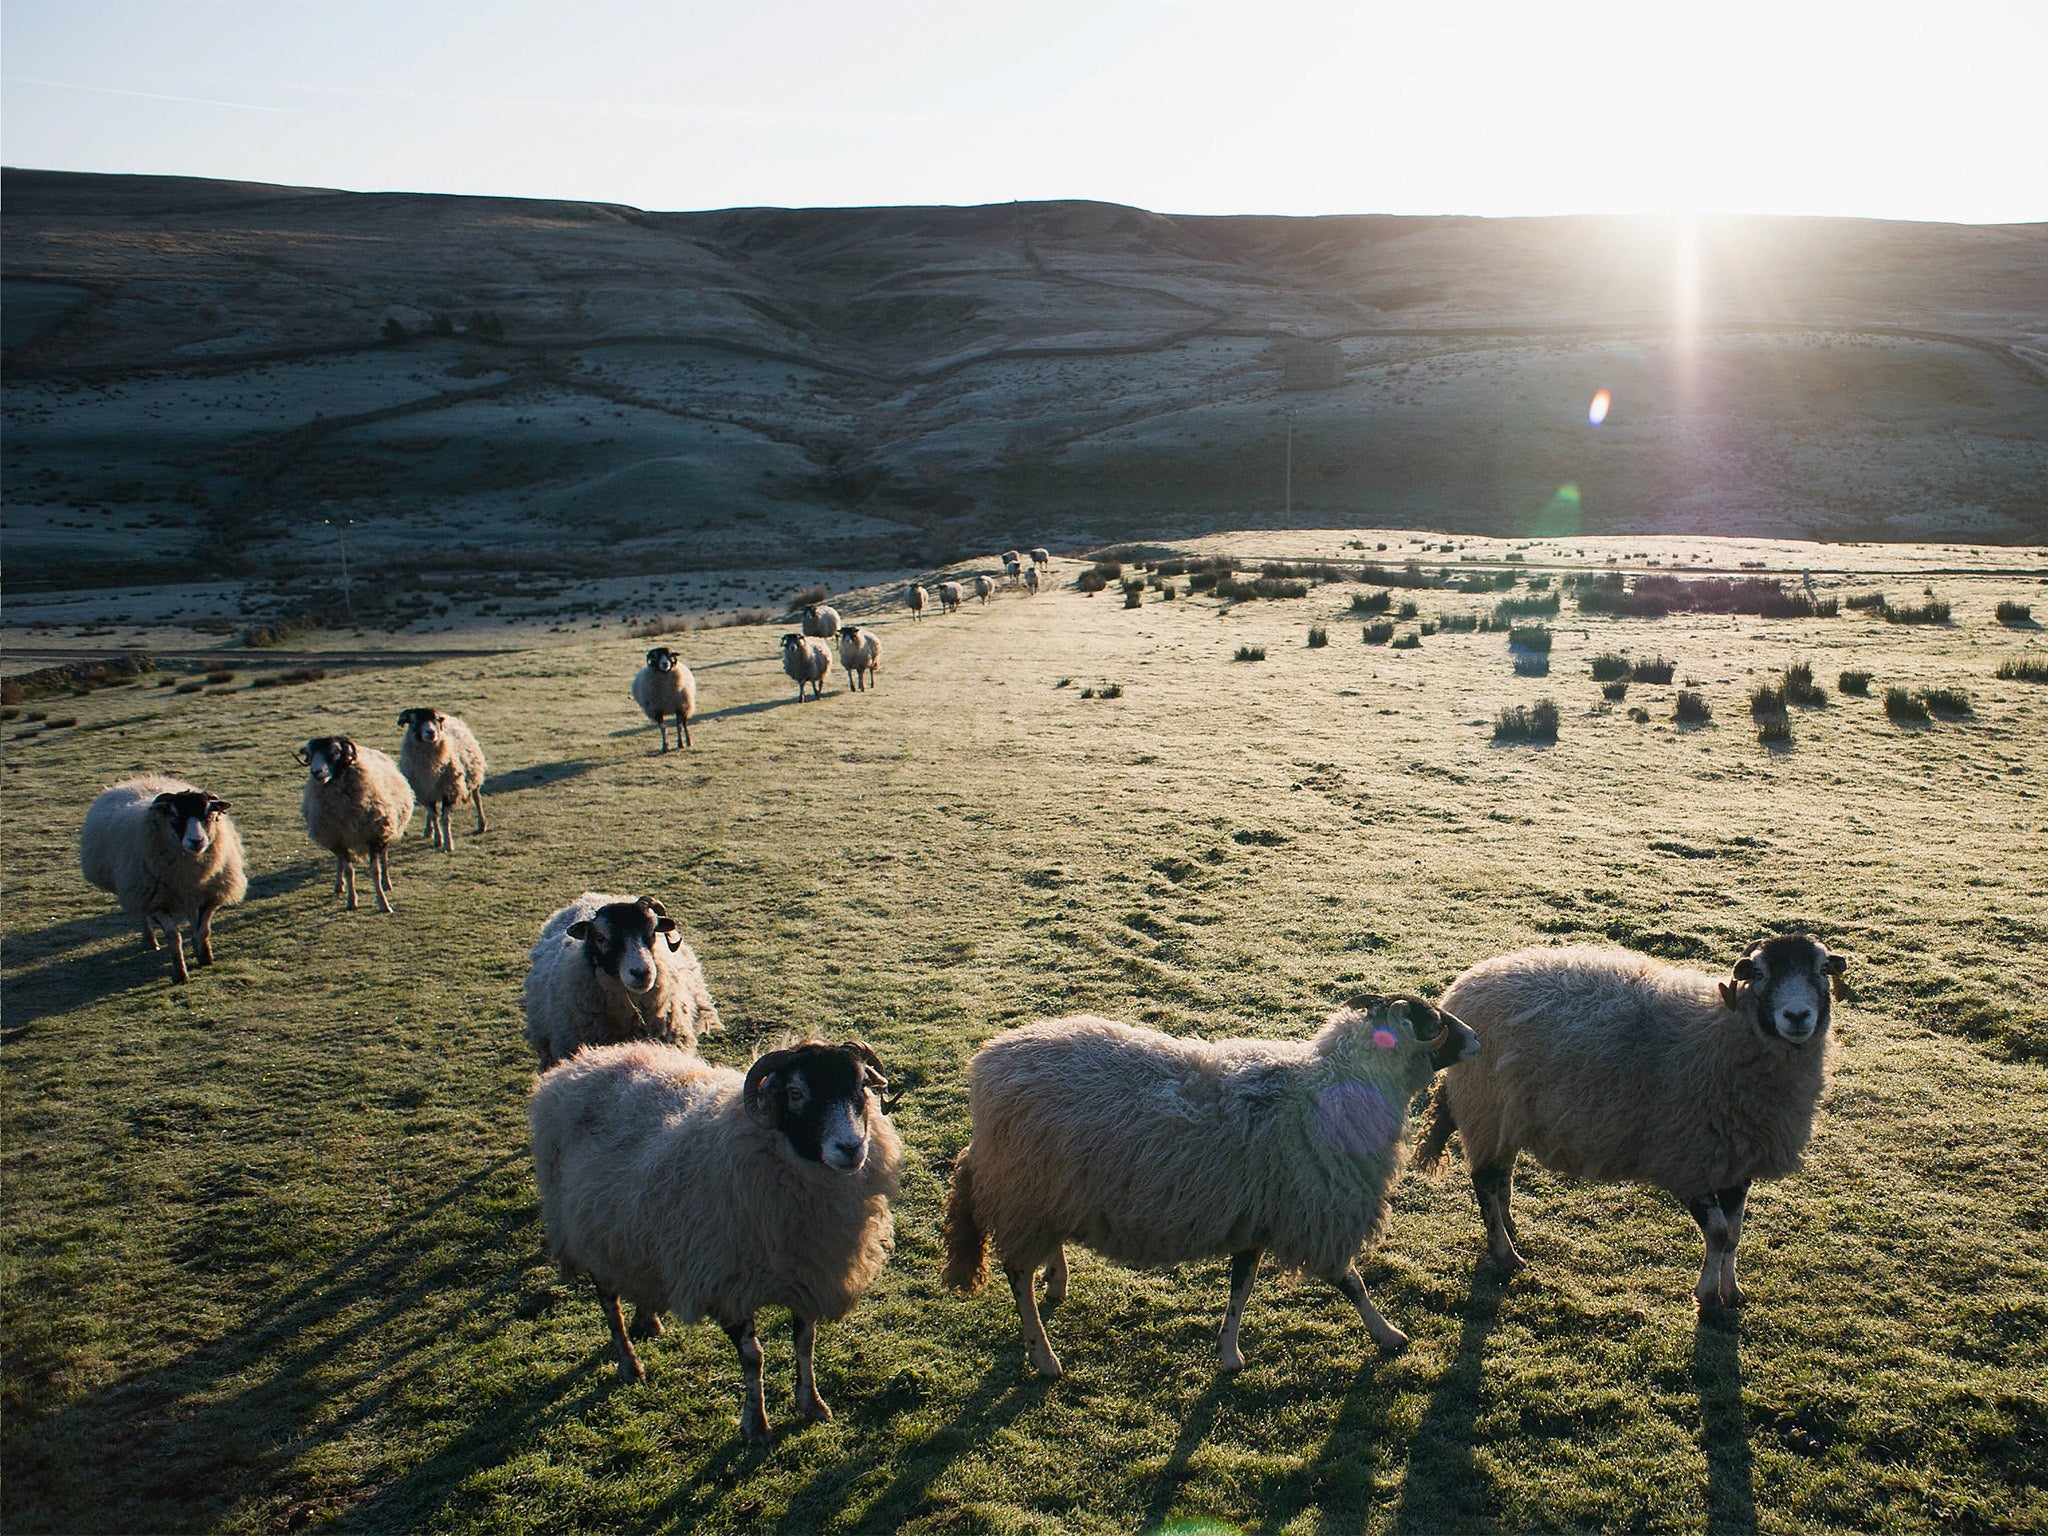 Swaledale in North Yorkshire may have bags of rural charm, but its poor internet connection makes life difficult for the communities that live there